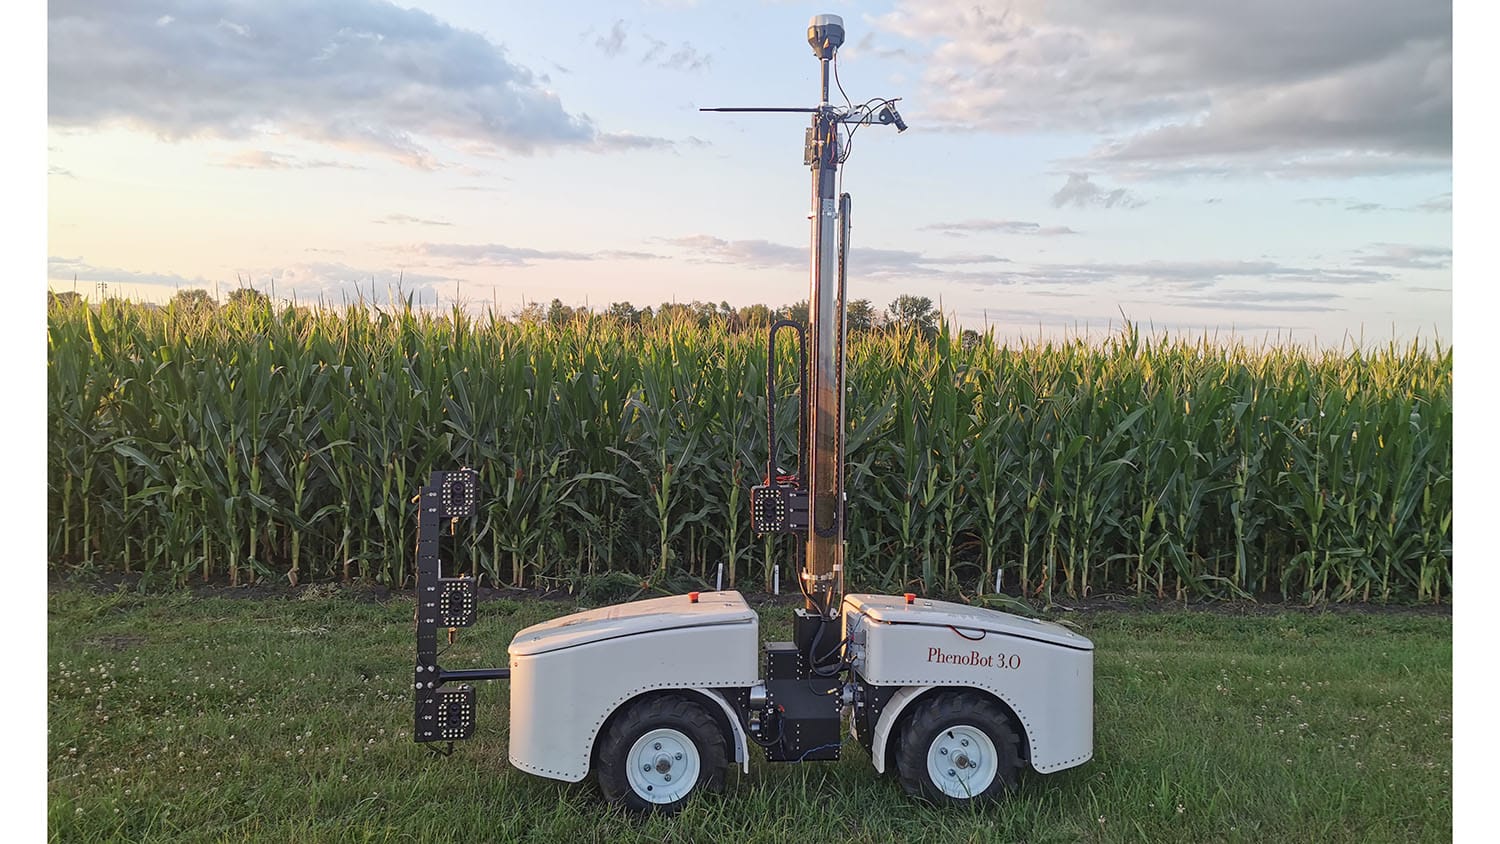 a robot developed by NC State researchers in a corn field